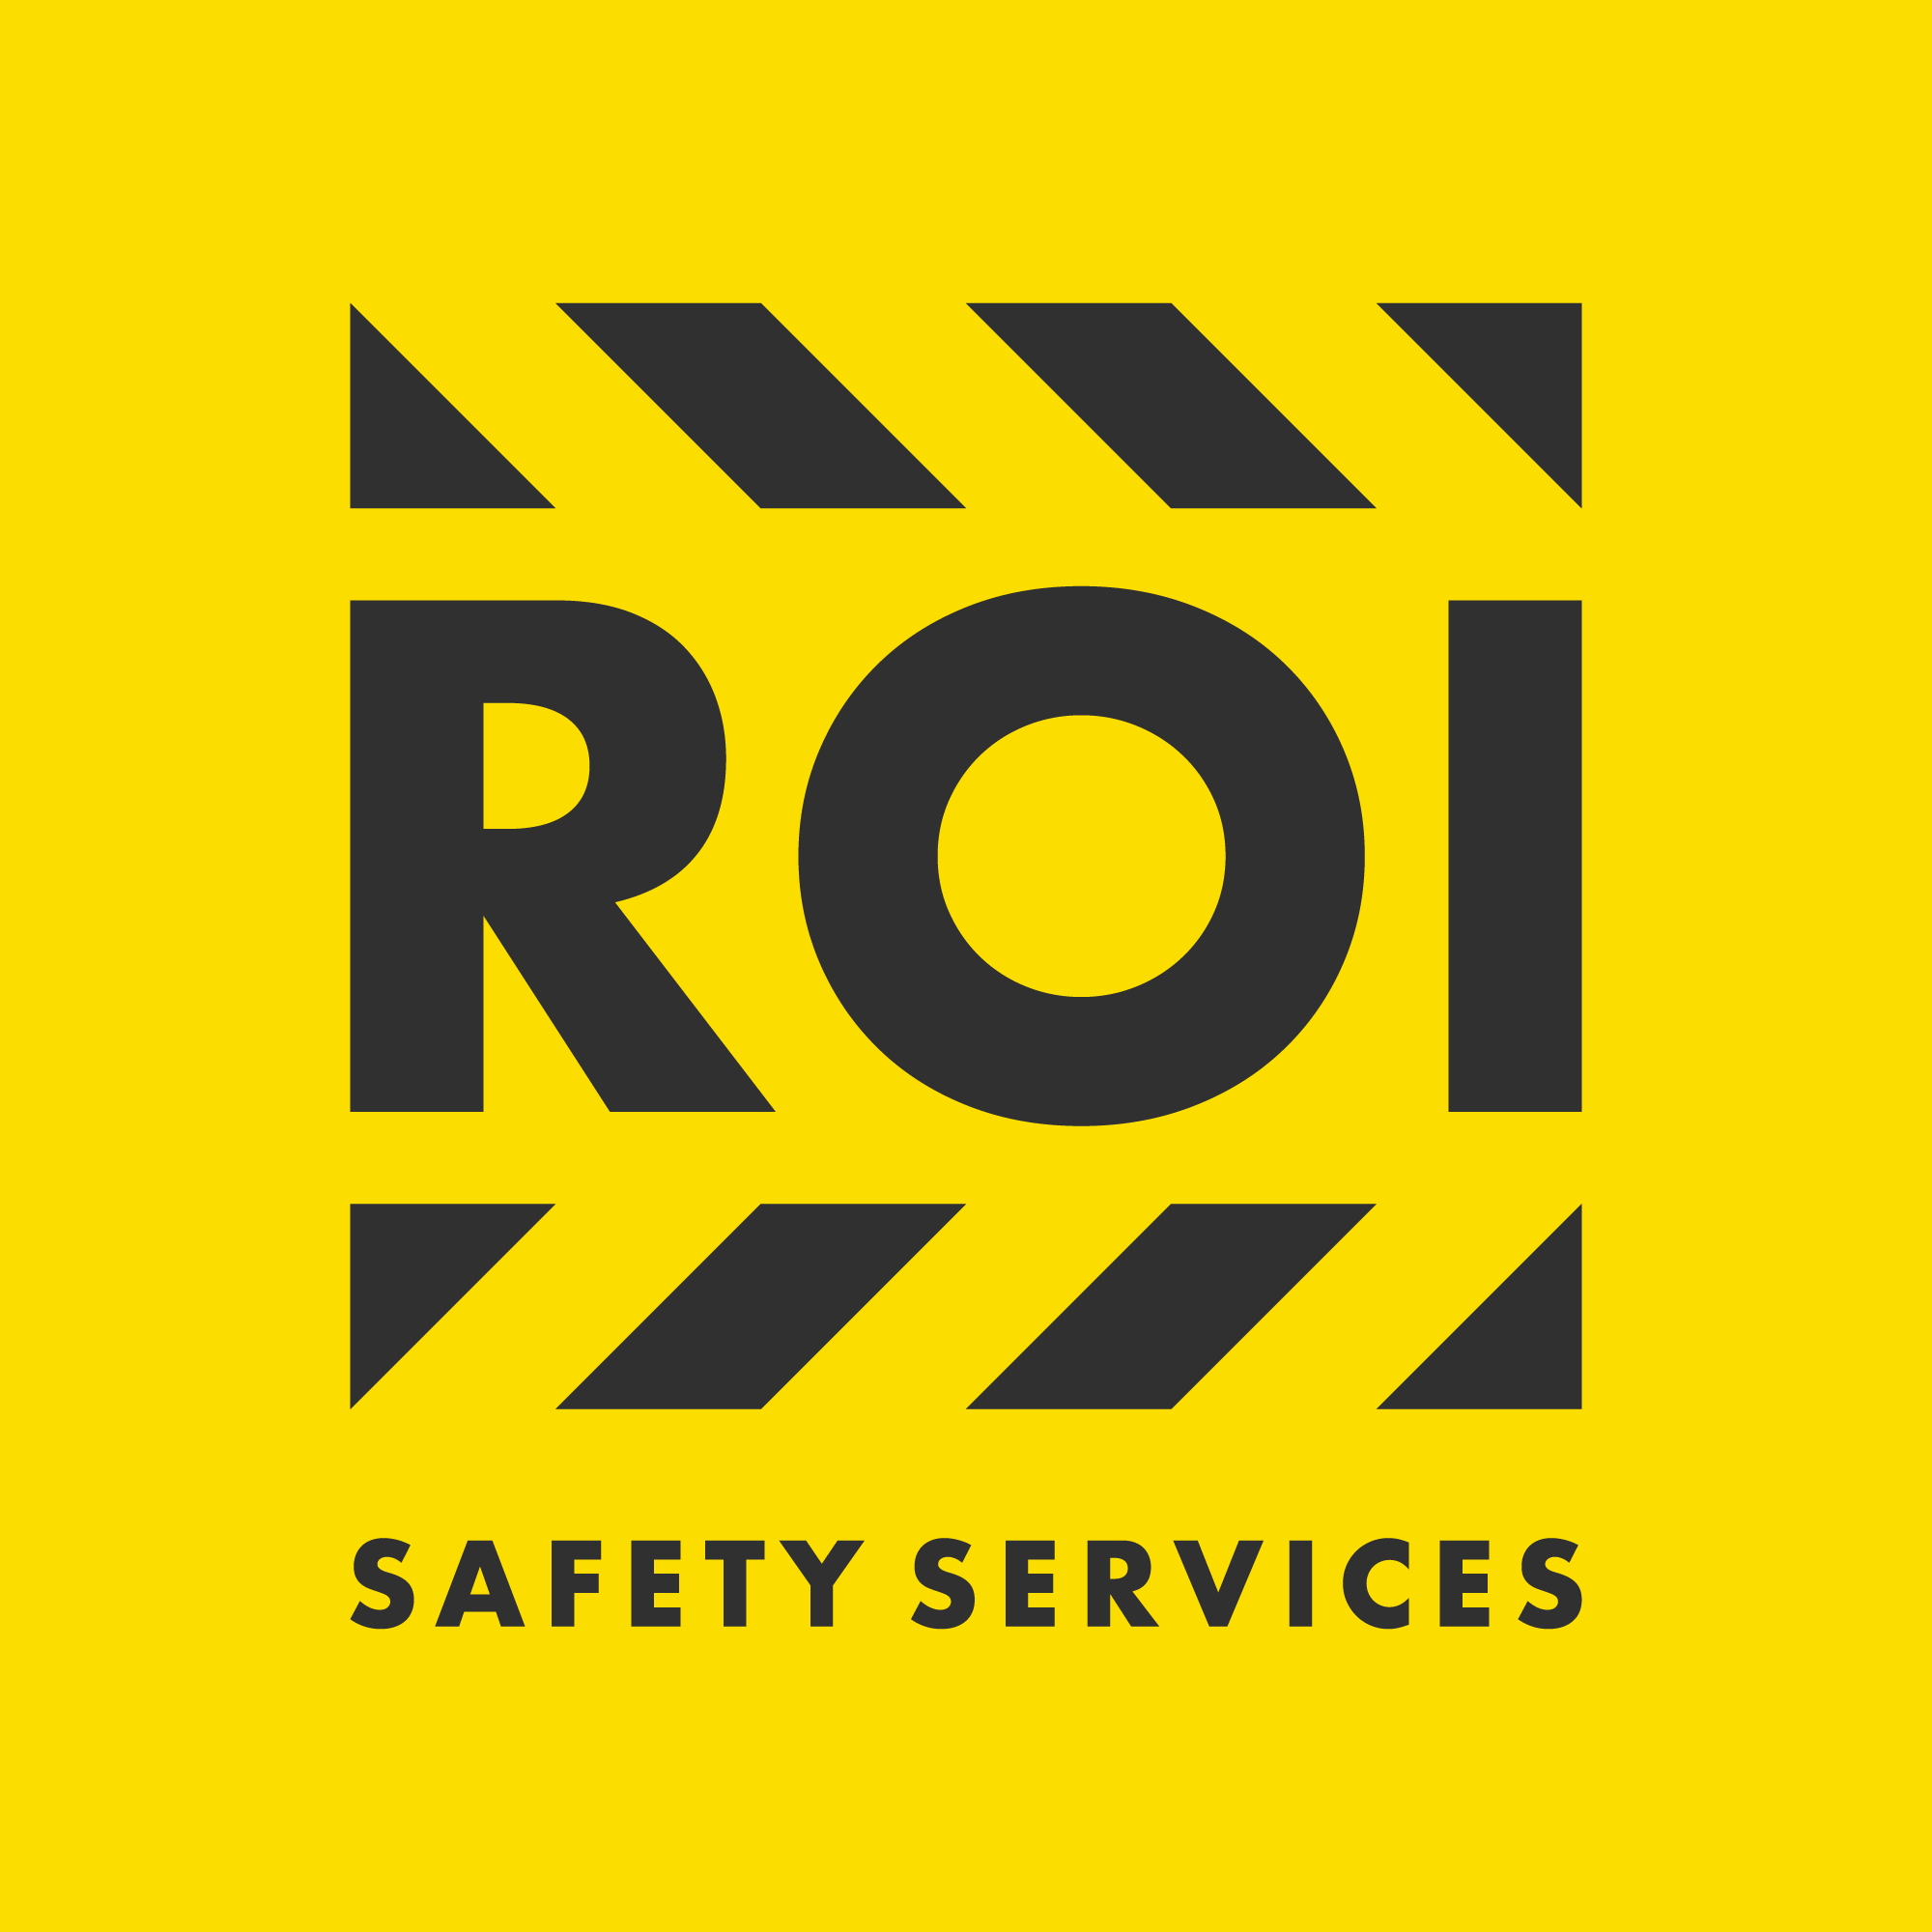 Certified Forklift Operator Training In Ontario Ca Osha Safety Compliant Roi Safety Services